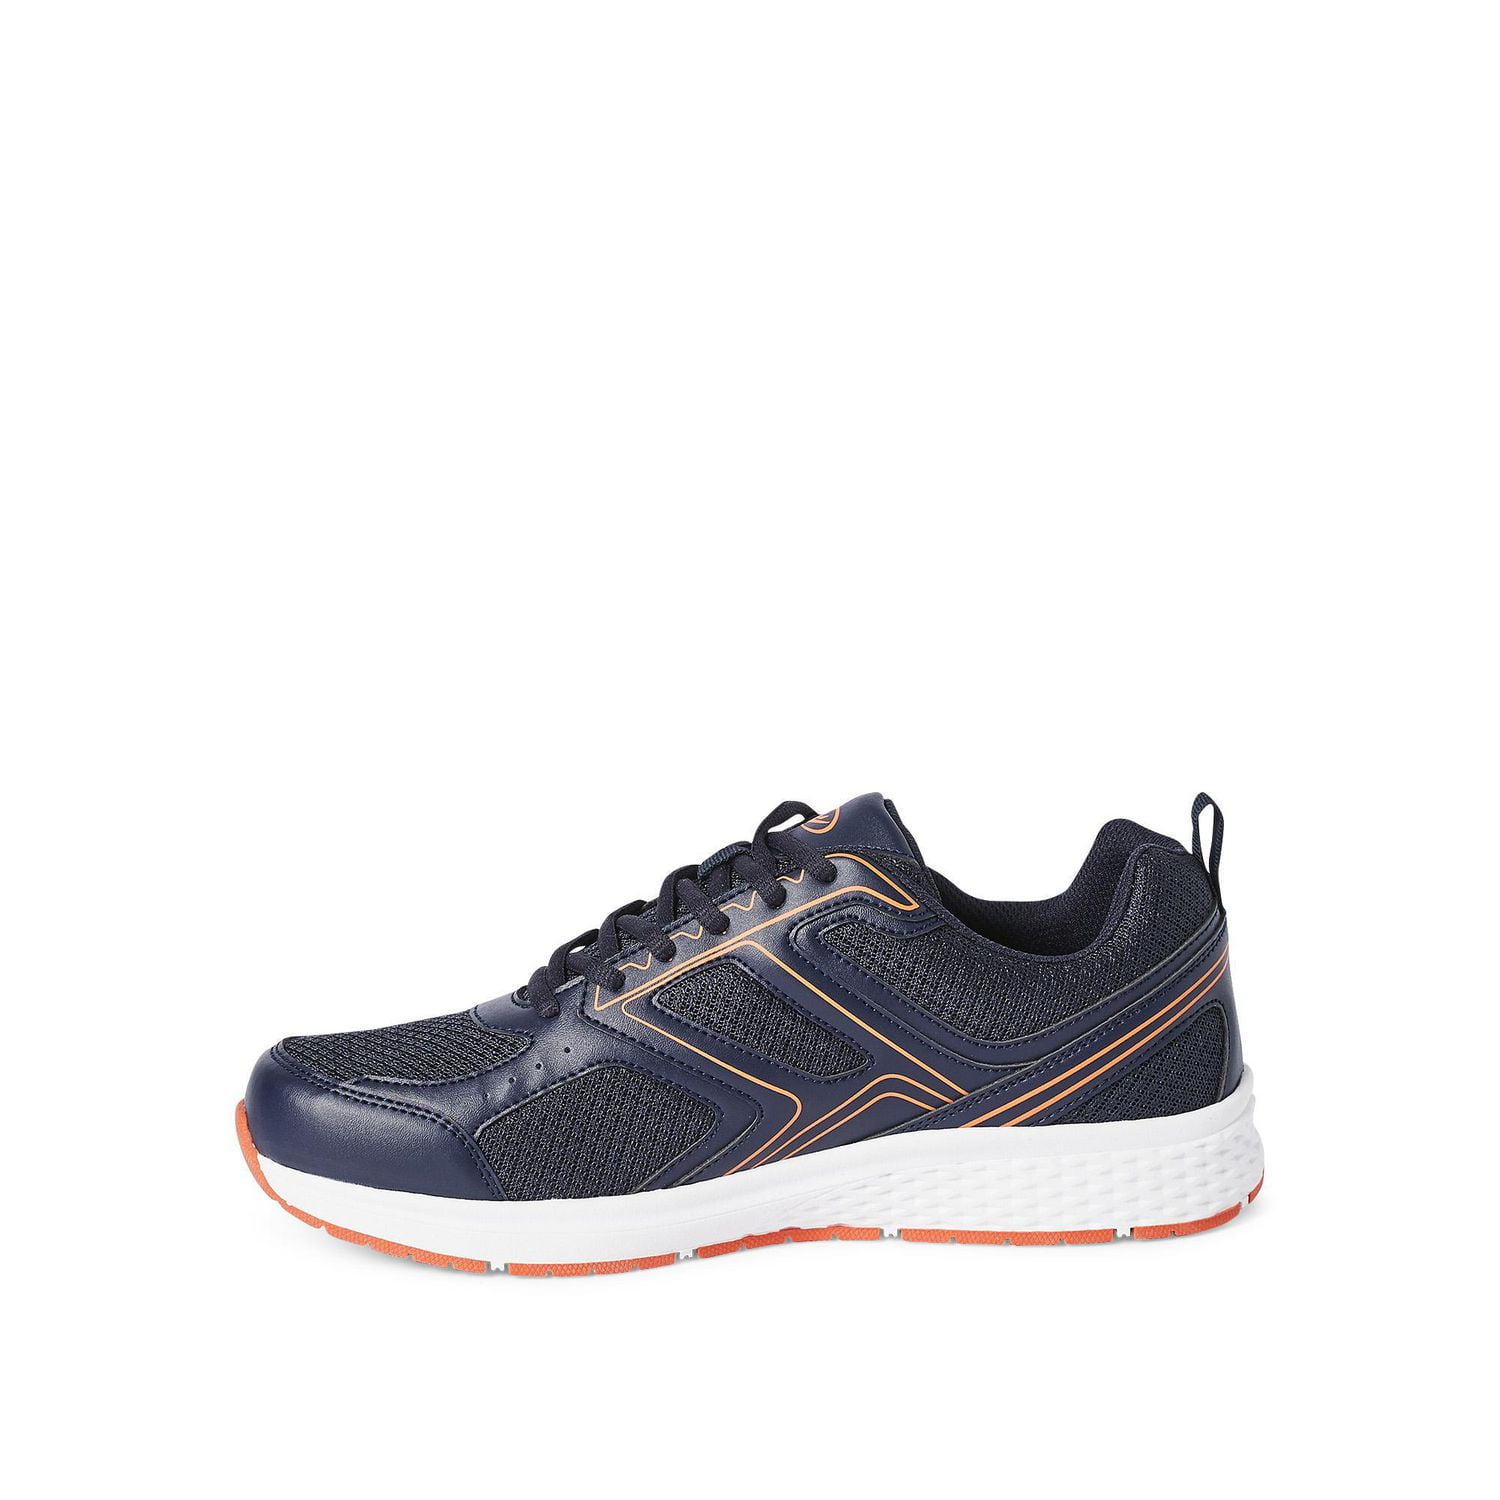 Athletic Works Men's Chunky Athletic Shoe (Multiple Widths)